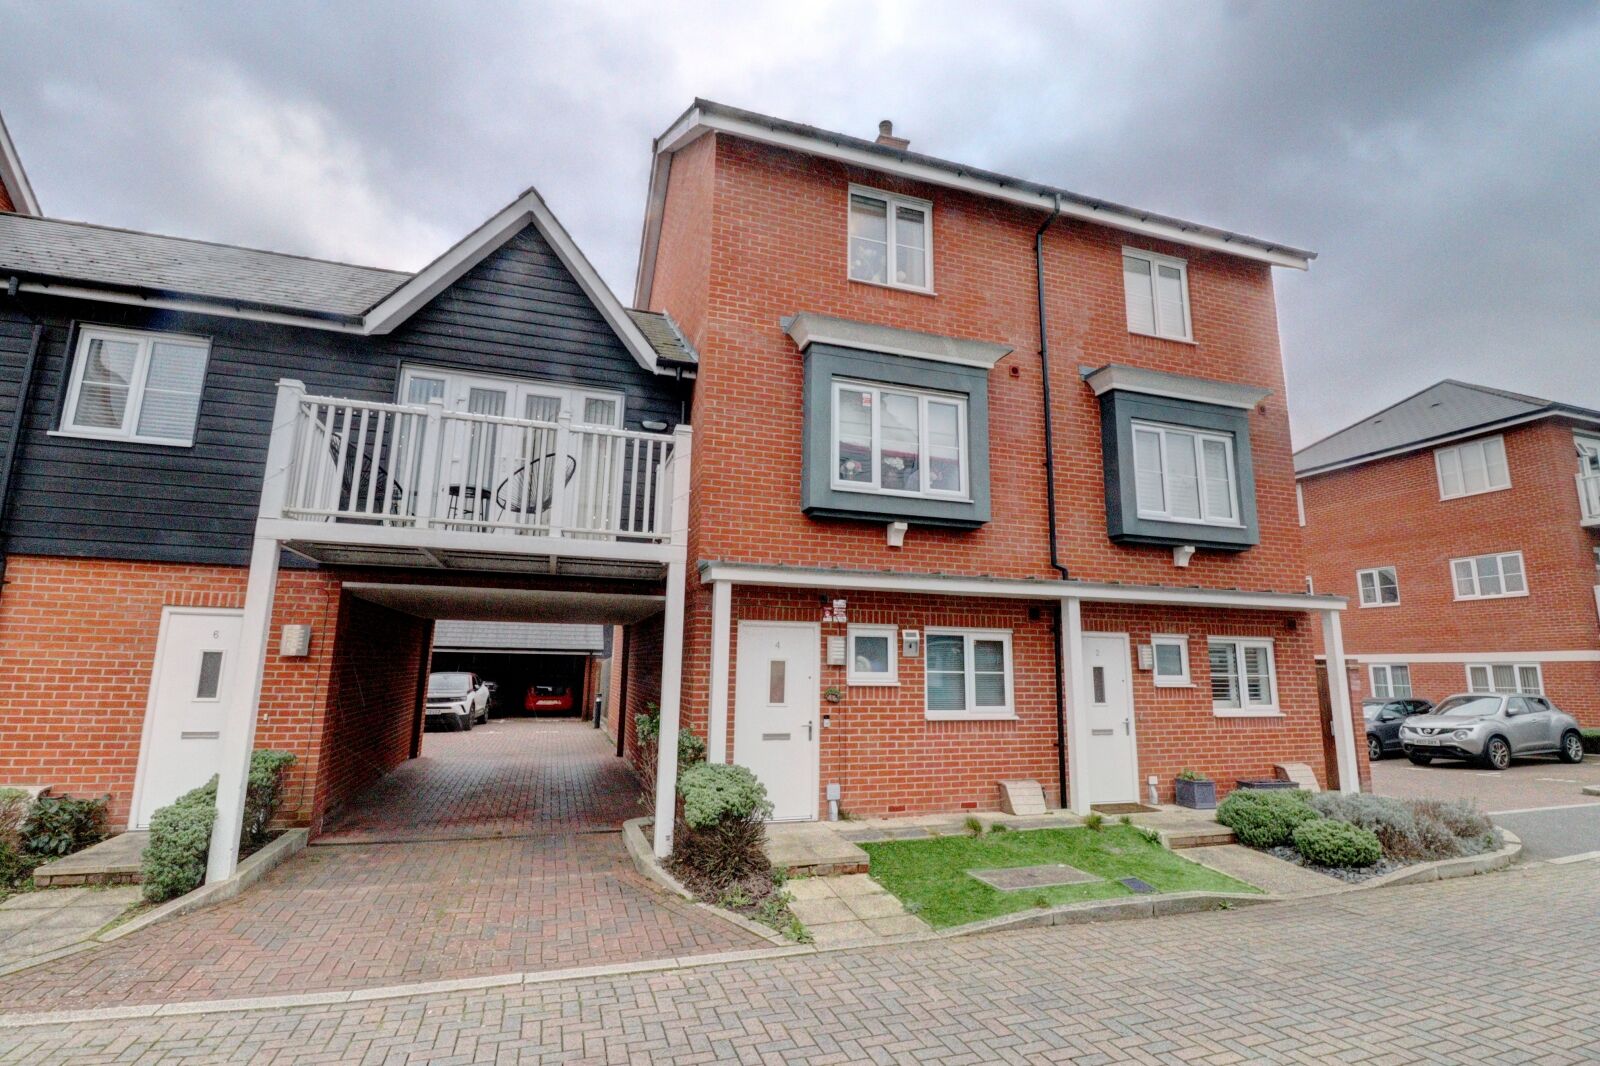 4 bedroom  house to rent, Available now Greenwich Drive, High Wycombe, HP11, main image